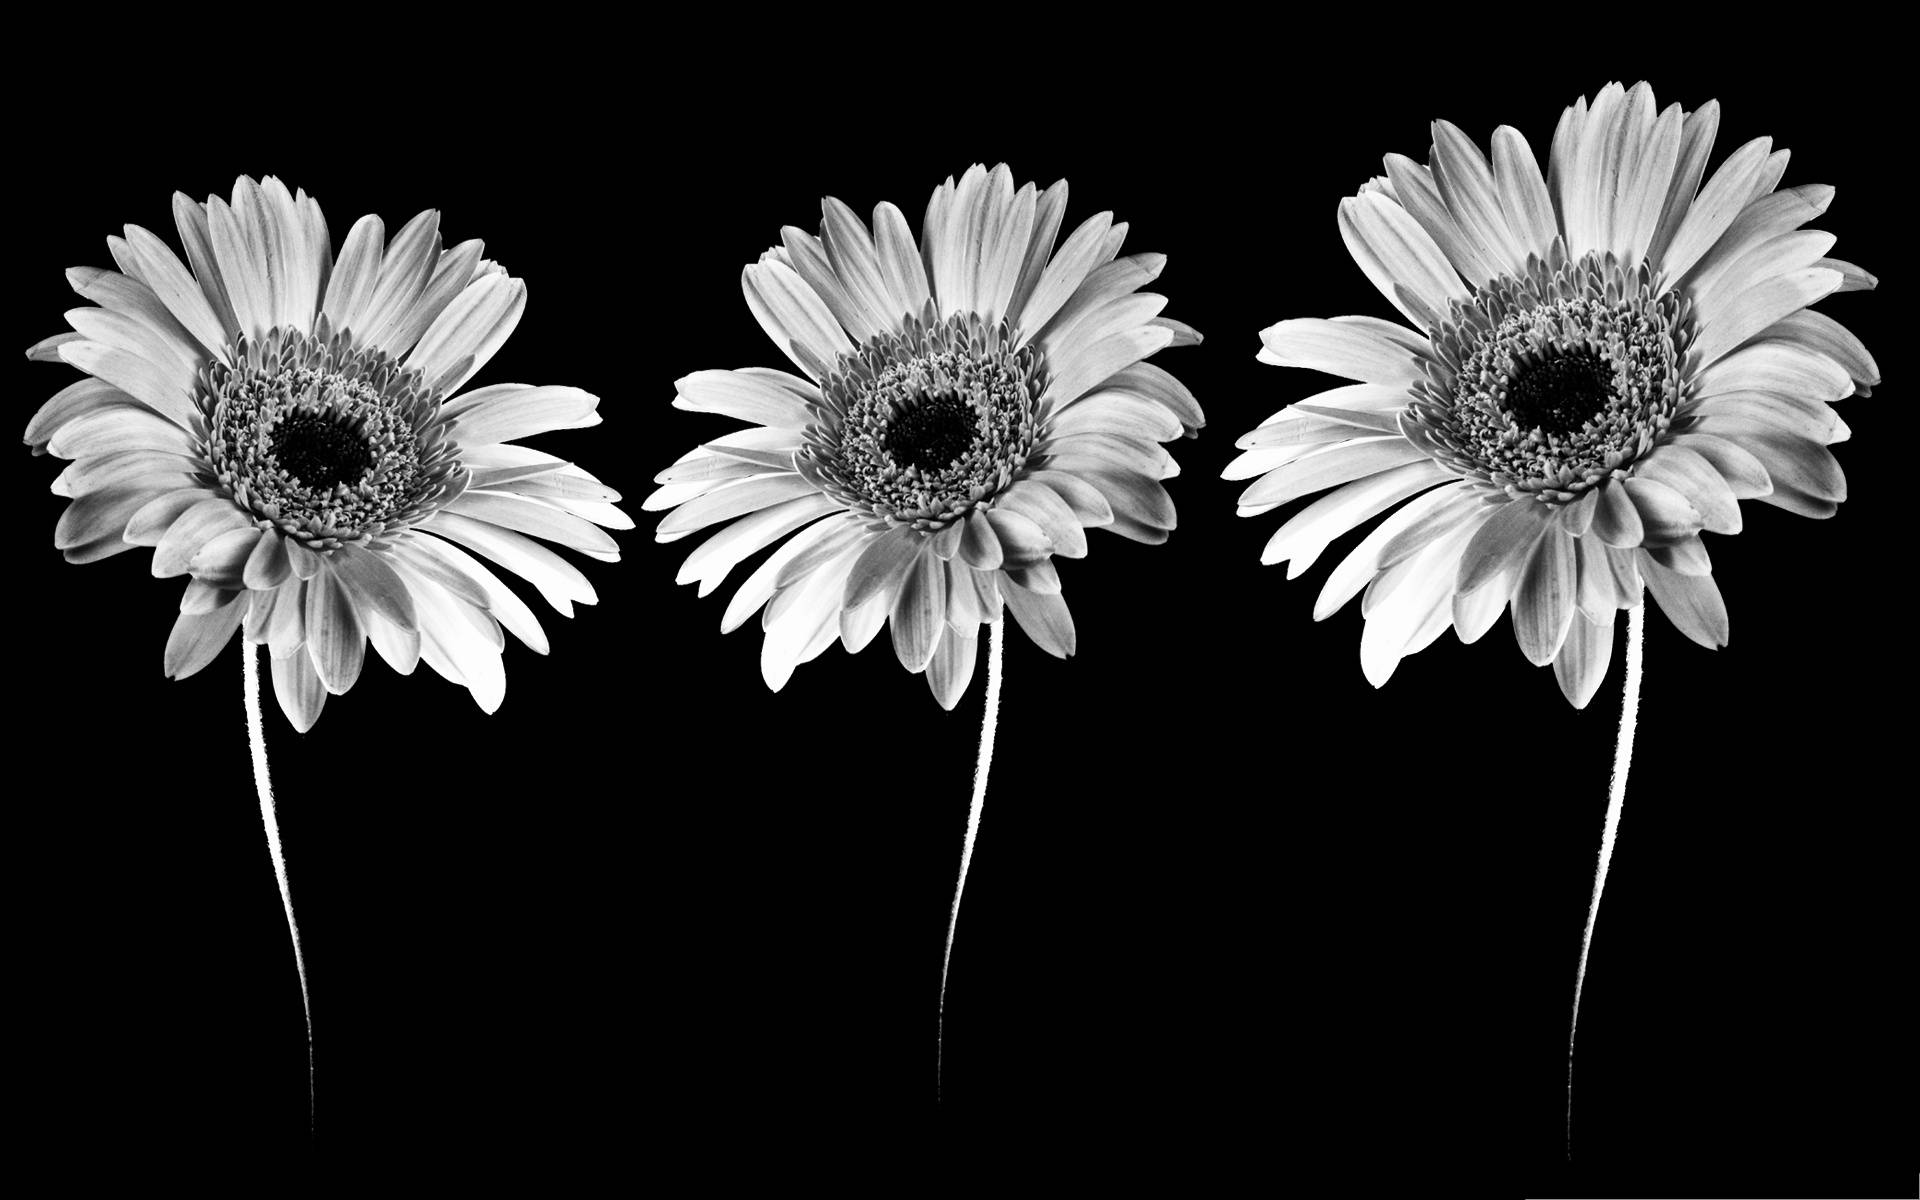 100+] Black And White Flower Wallpapers 